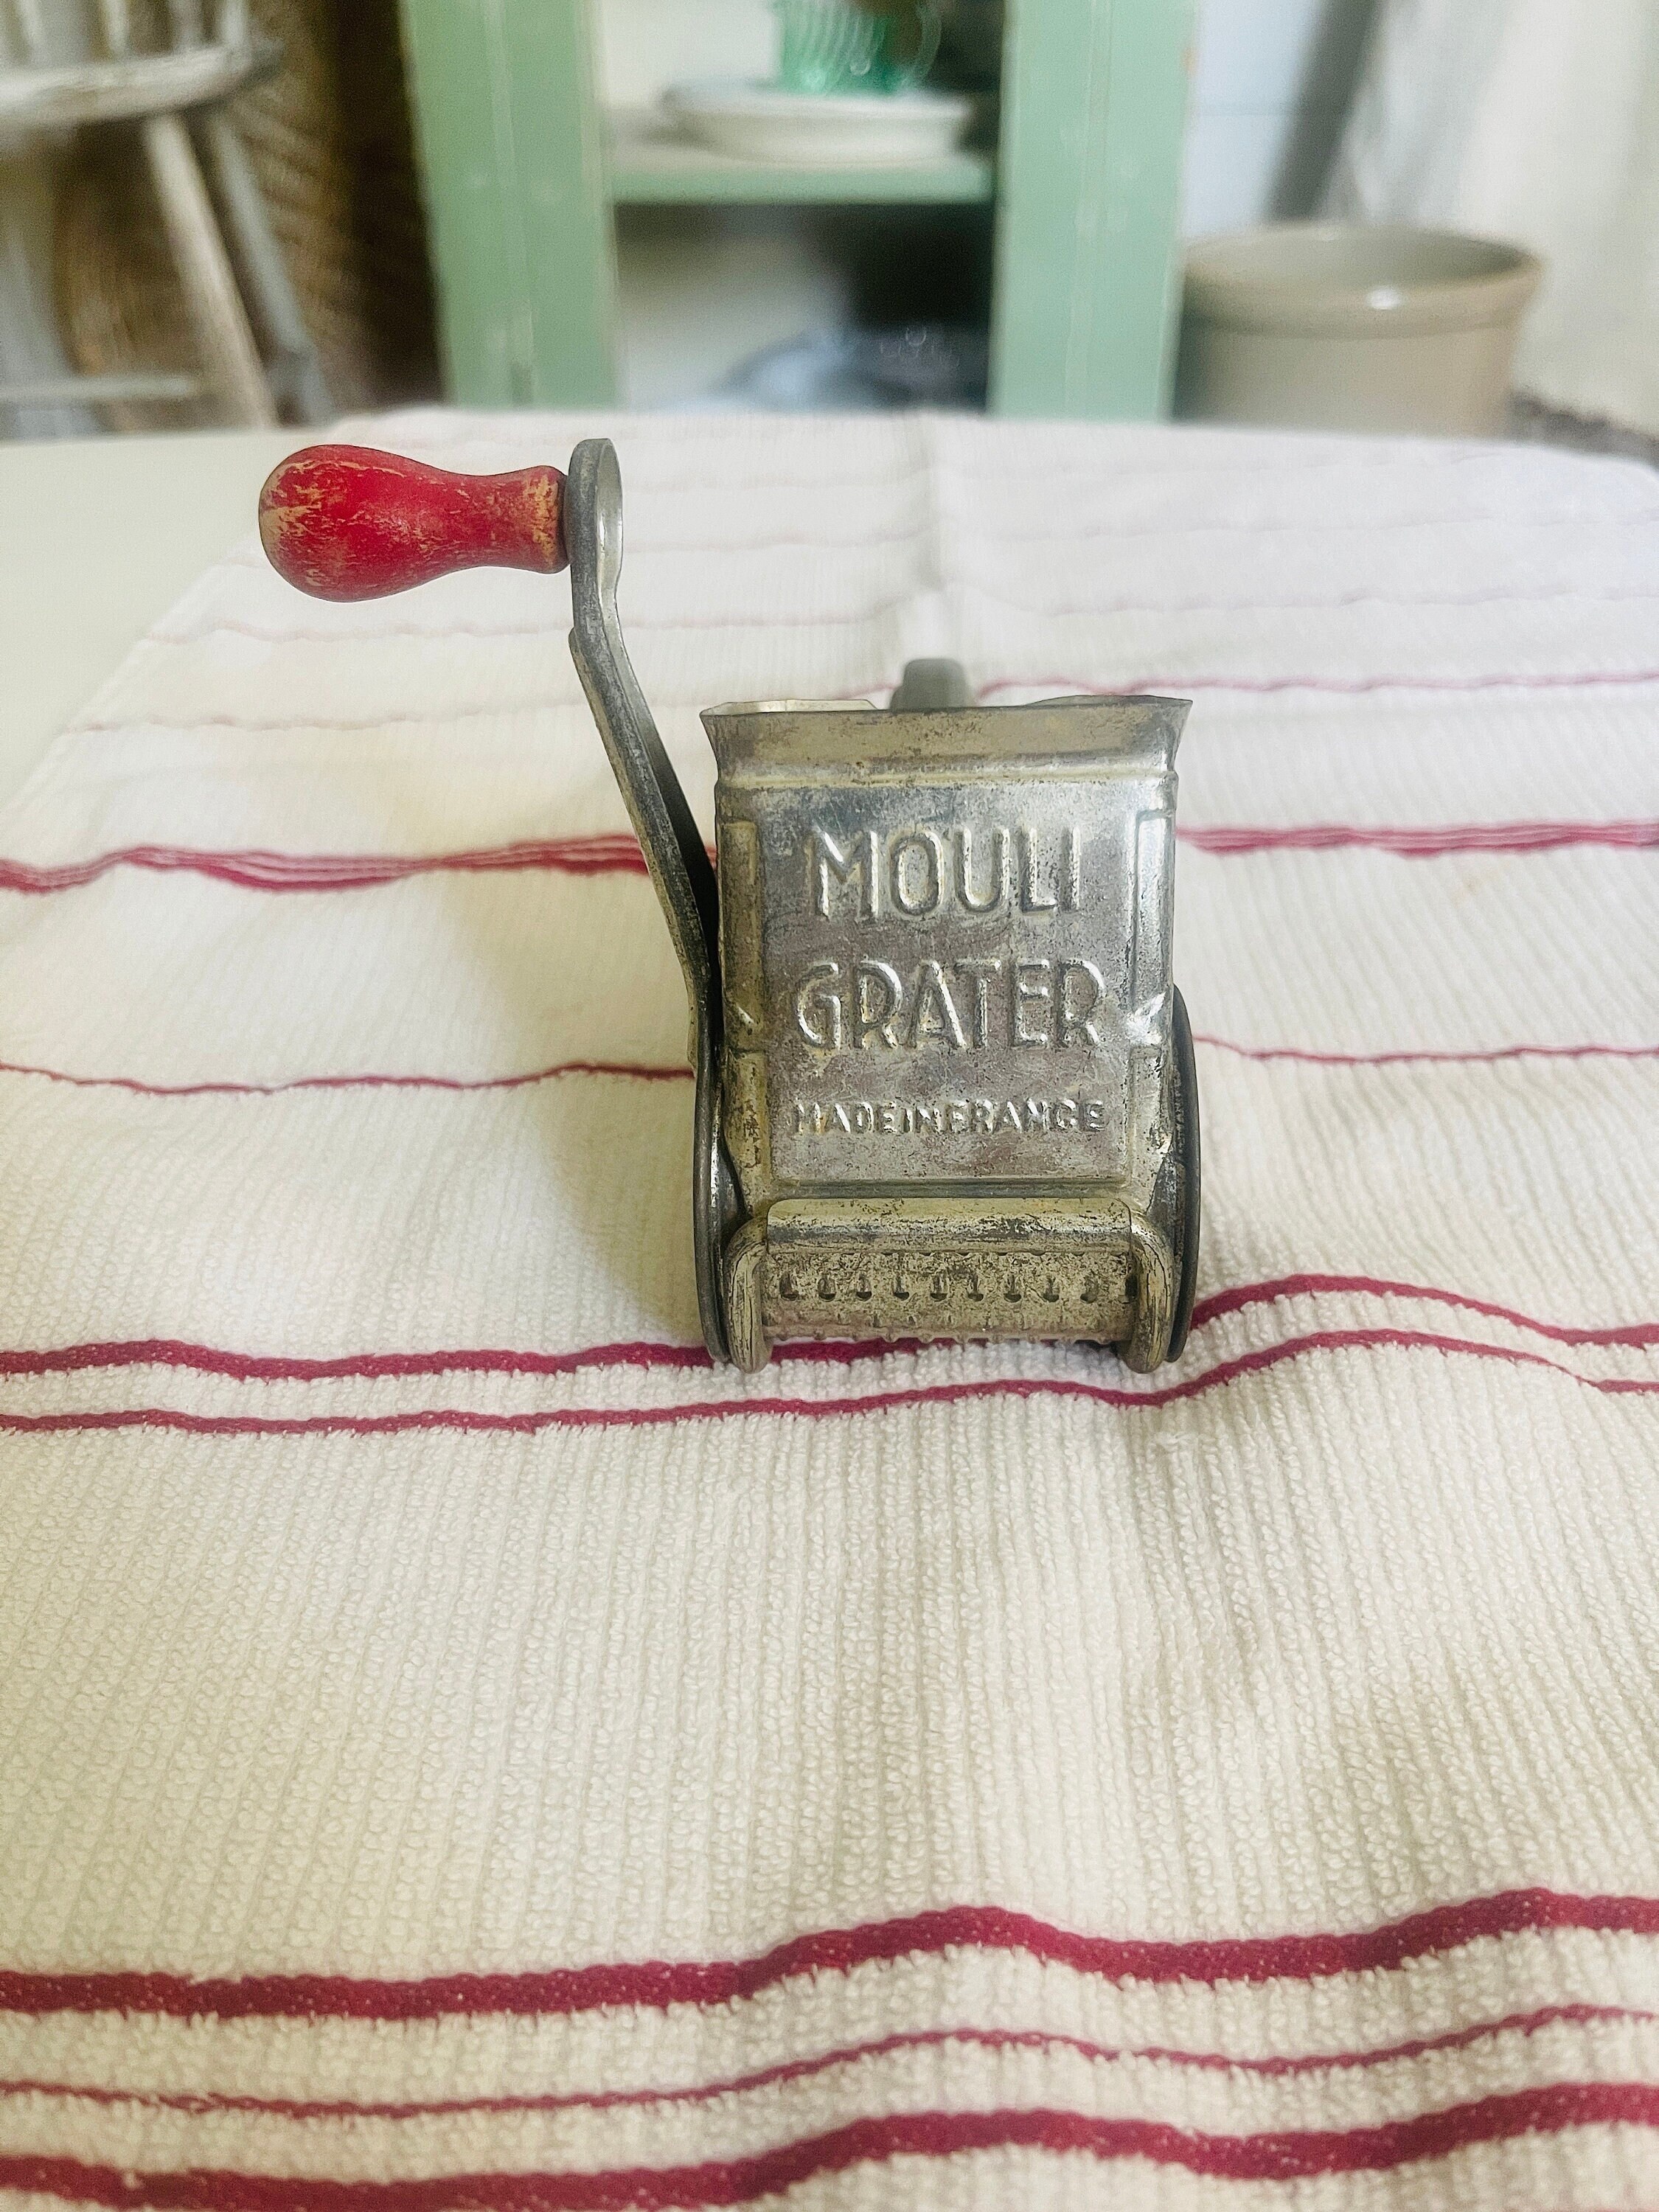 Mouli Grater - according to my mom, this belonged to my great